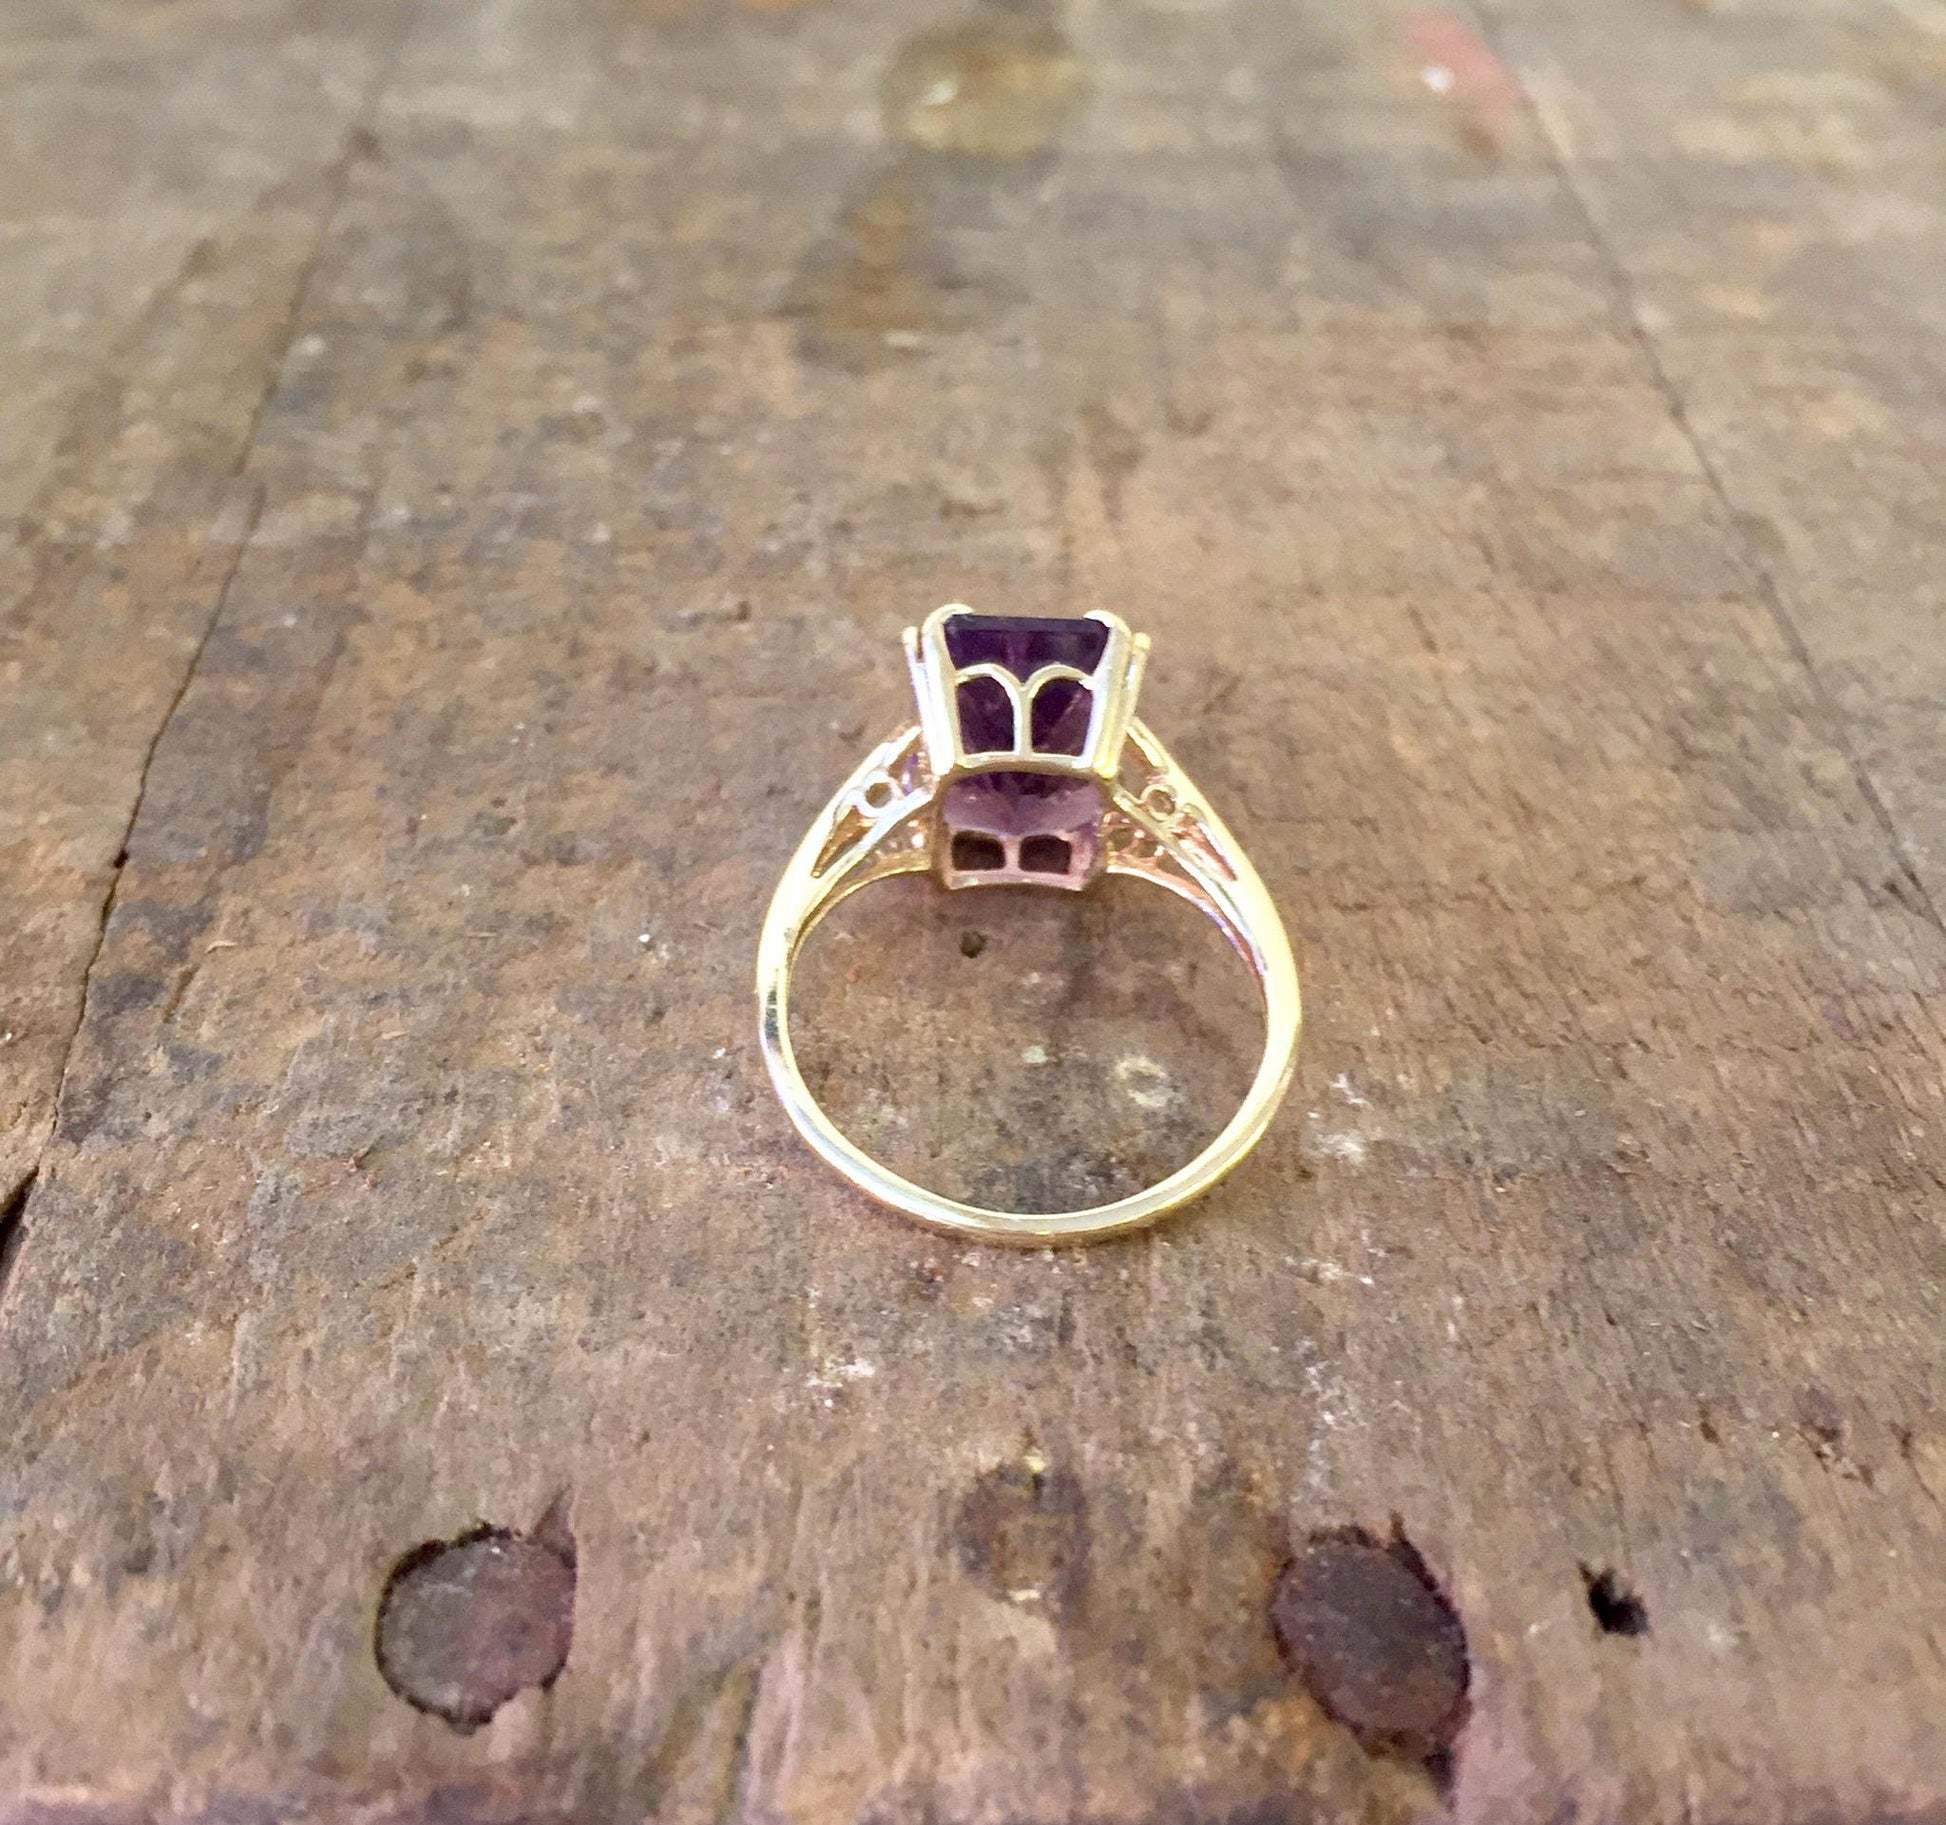 14 karat yellow gold ring with emerald cut amethyst gemstone on rustic wooden surface